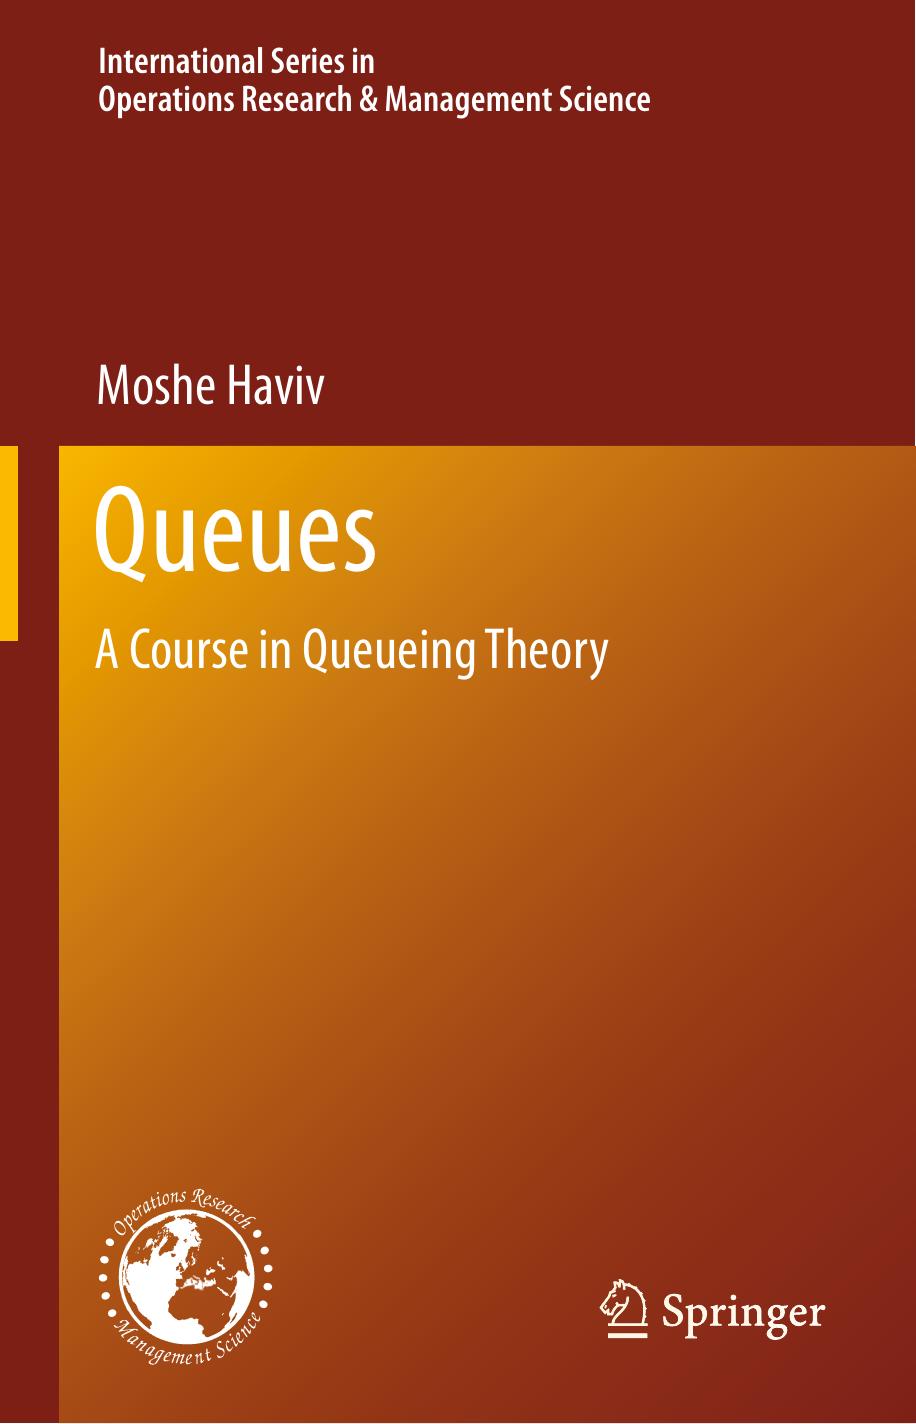 Queues A Course in Queueing Theory